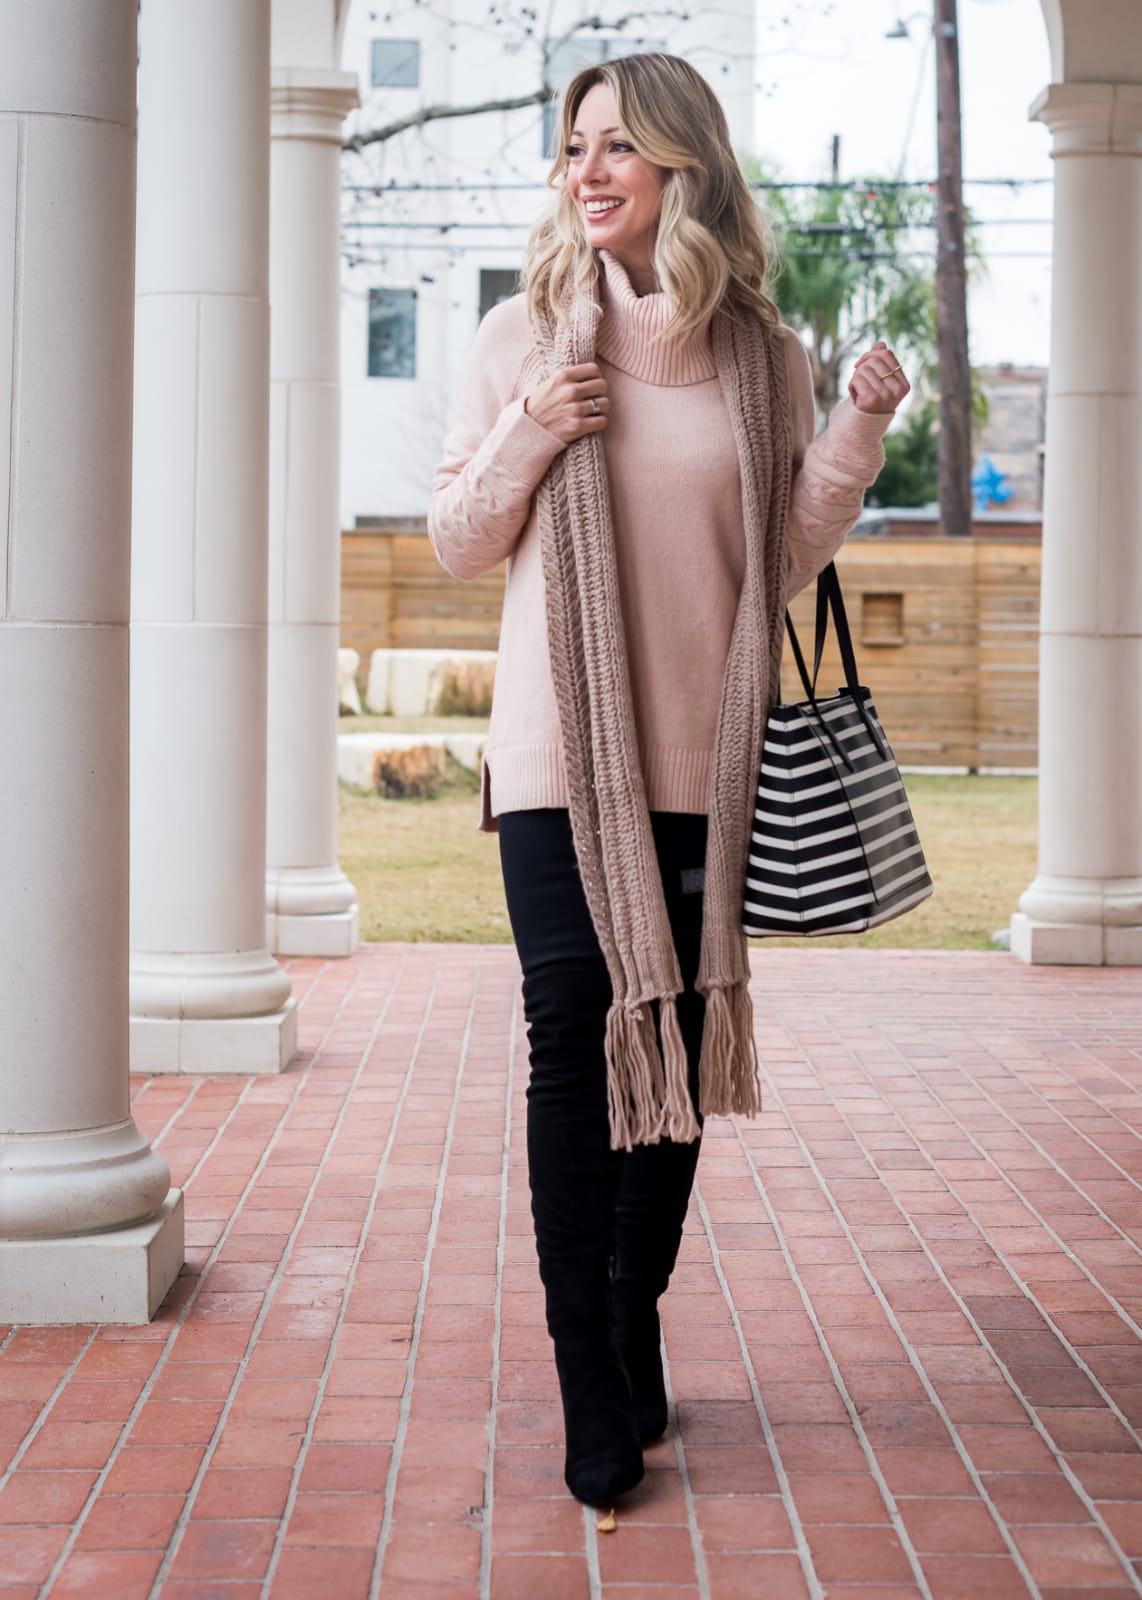 Cute winter outfit - pink sweater and black jeans (1)